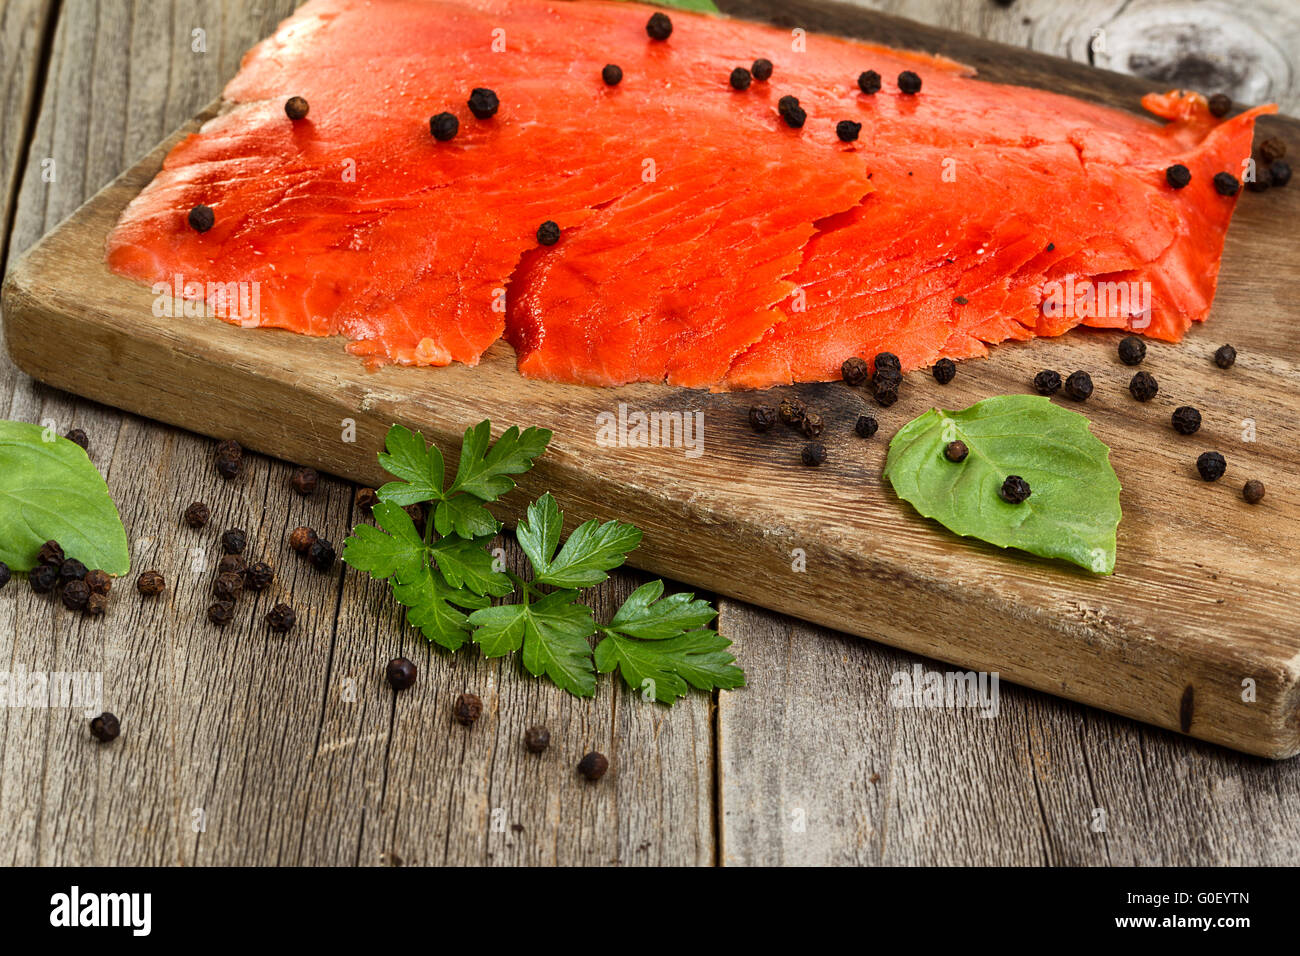 Close of cold smoked salmon on wooden server ready to eat Stock Photo